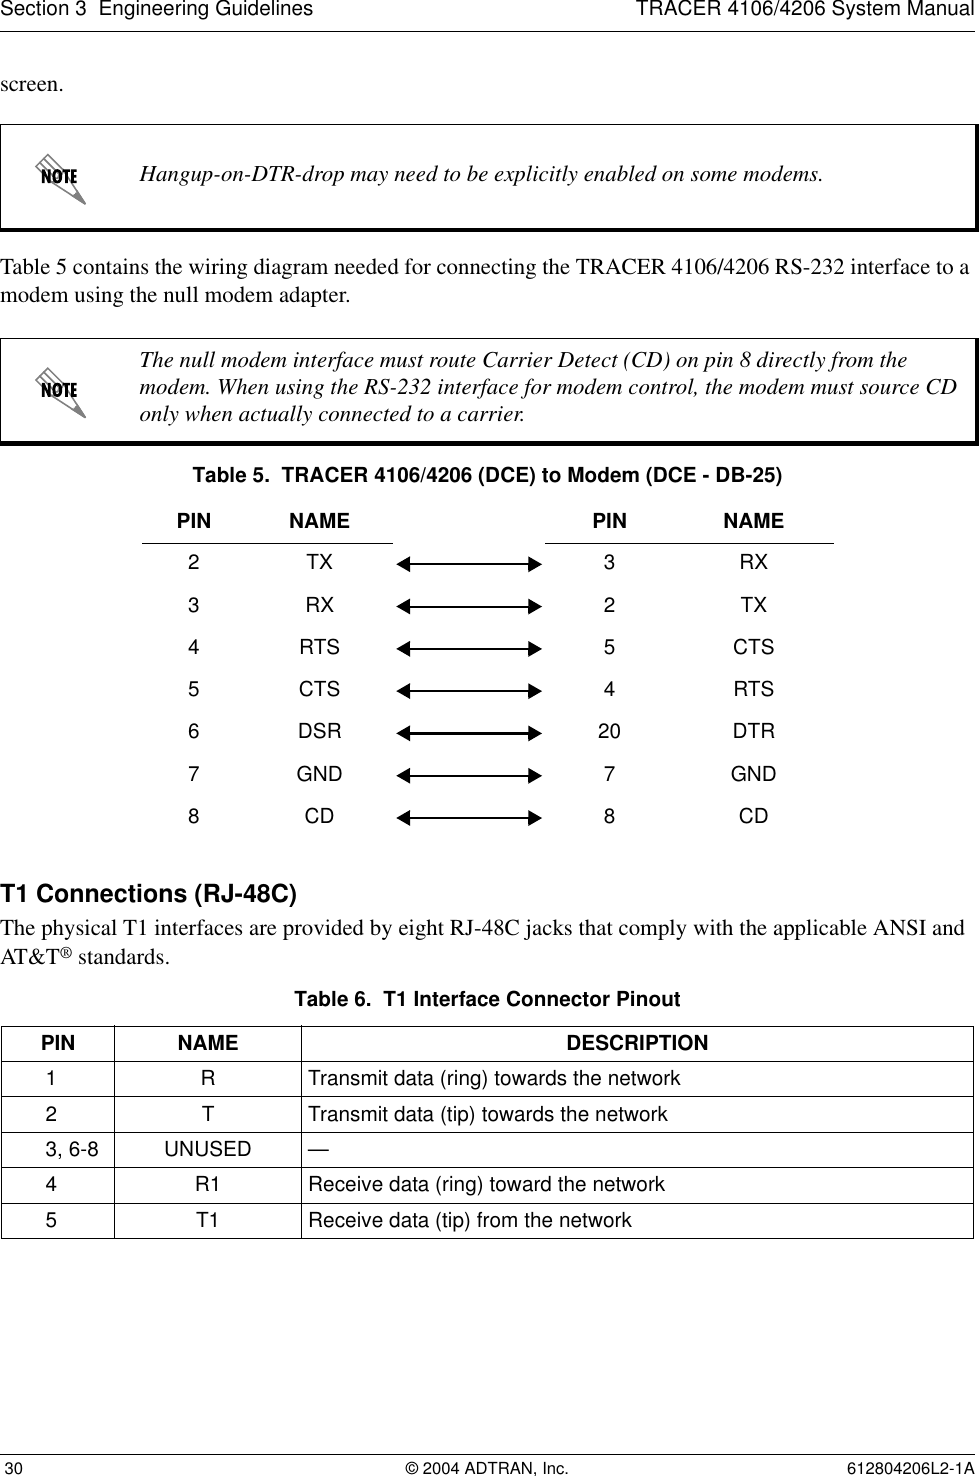 Section 3  Engineering Guidelines TRACER 4106/4206 System Manual 30 © 2004 ADTRAN, Inc. 612804206L2-1Ascreen.Table 5 contains the wiring diagram needed for connecting the TRACER 4106/4206 RS-232 interface to a modem using the null modem adapter.T1 Connections (RJ-48C)The physical T1 interfaces are provided by eight RJ-48C jacks that comply with the applicable ANSI and AT&amp;T® standards.Hangup-on-DTR-drop may need to be explicitly enabled on some modems.The null modem interface must route Carrier Detect (CD) on pin 8 directly from the modem. When using the RS-232 interface for modem control, the modem must source CD only when actually connected to a carrier.Table 5.  TRACER 4106/4206 (DCE) to Modem (DCE - DB-25)PIN NAME PIN NAME2TX 3 RX3RX 2 TX4RTS 5 CTS5 CTS 4 RTS6DSR 20 DTR7 GND 7 GND8CD 8 CDTable 6.  T1 Interface Connector PinoutPIN NAME DESCRIPTION1RTransmit data (ring) towards the network2 T Transmit data (tip) towards the network3, 6-8 UNUSED —4R1 Receive data (ring) toward the network5T1 Receive data (tip) from the network